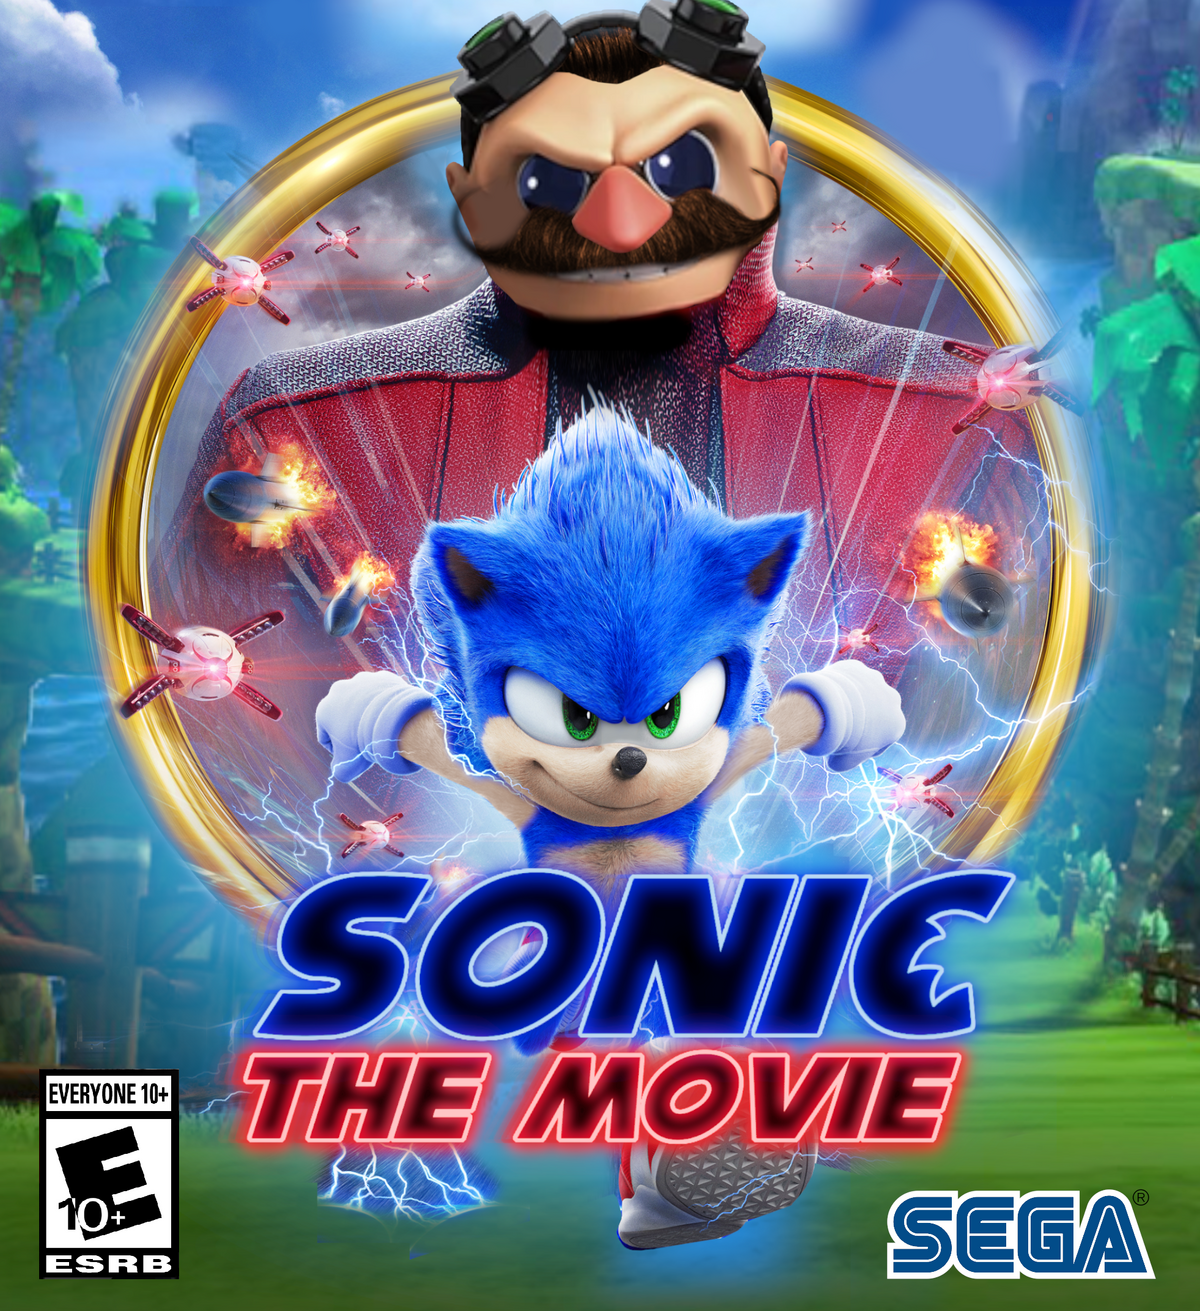 First Sonic The Hedgehog Live-Action Motion Movie Poster Revealed - Gameranx